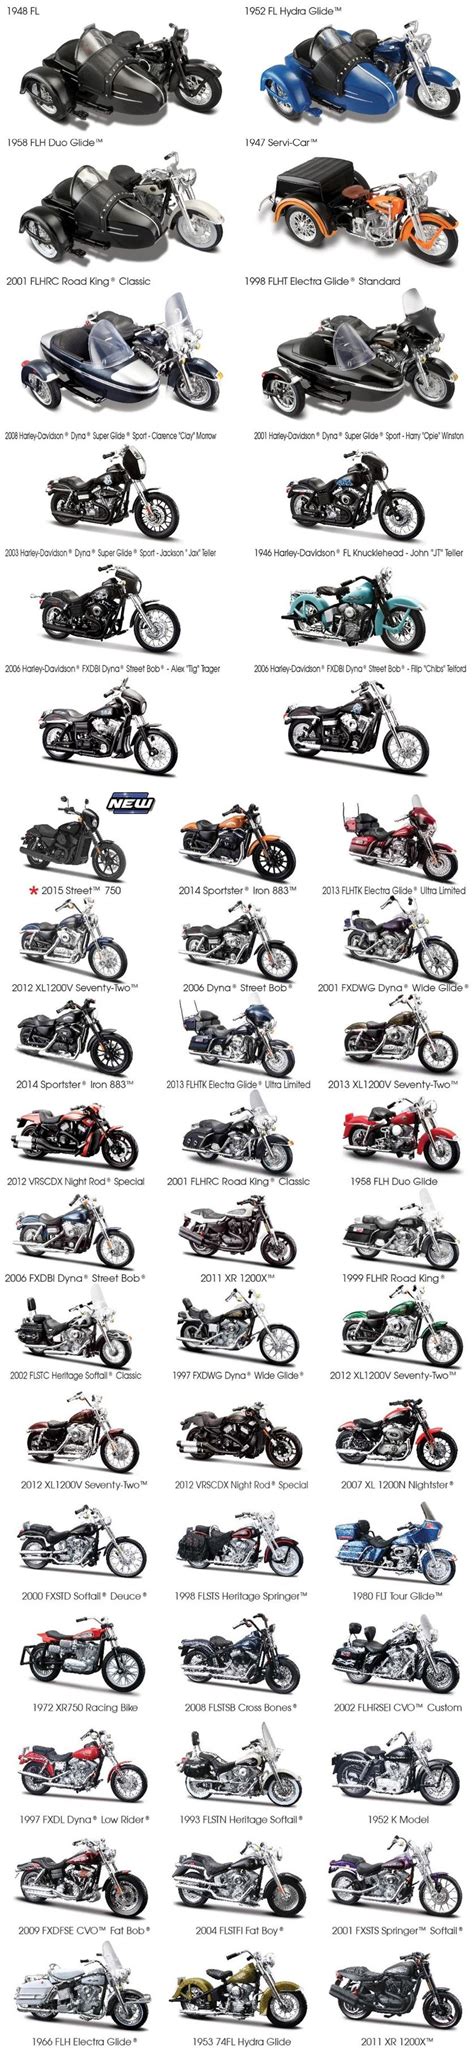 A Large Poster With Many Different Types Of Motorcycles